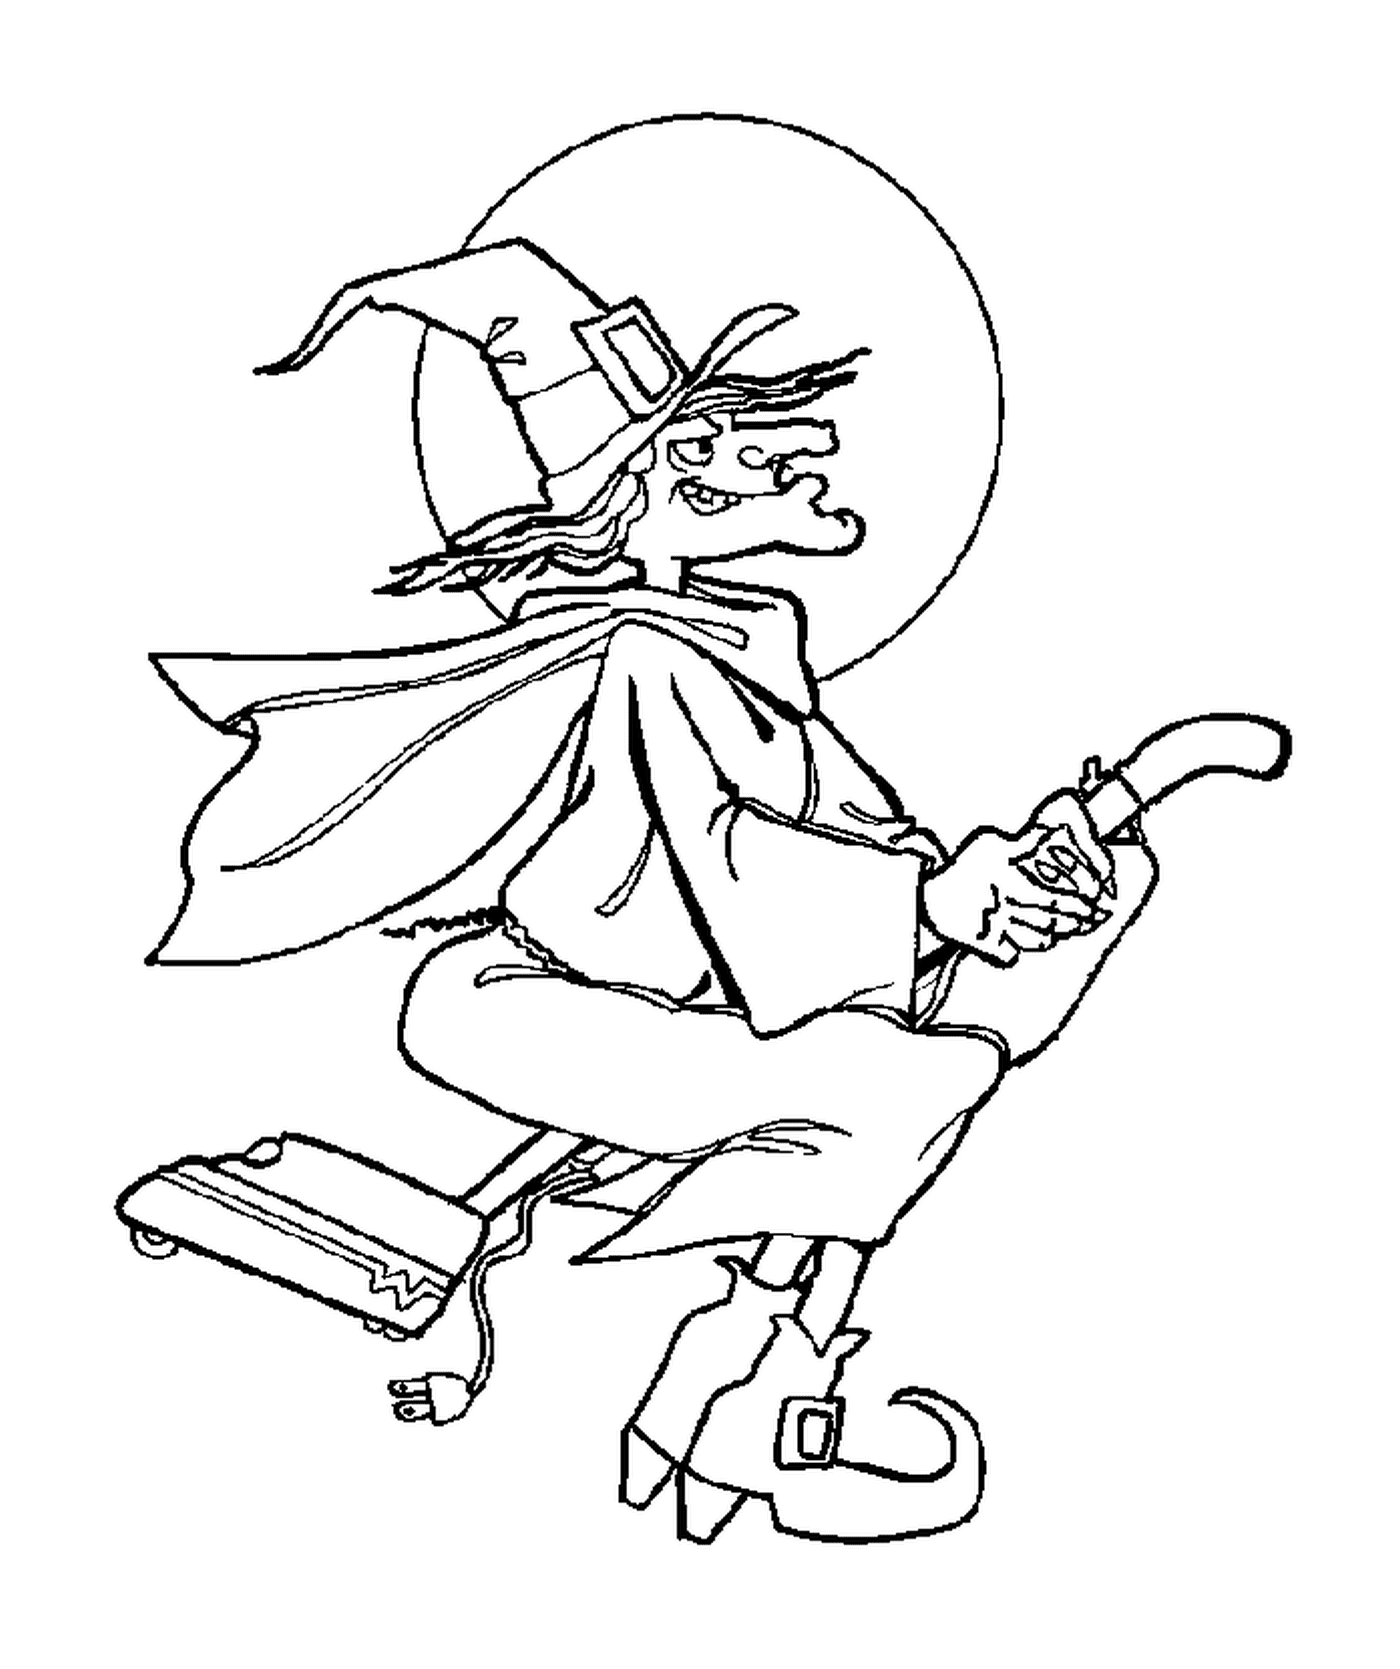  Witch flying in the sky on a vacuum cleaner 